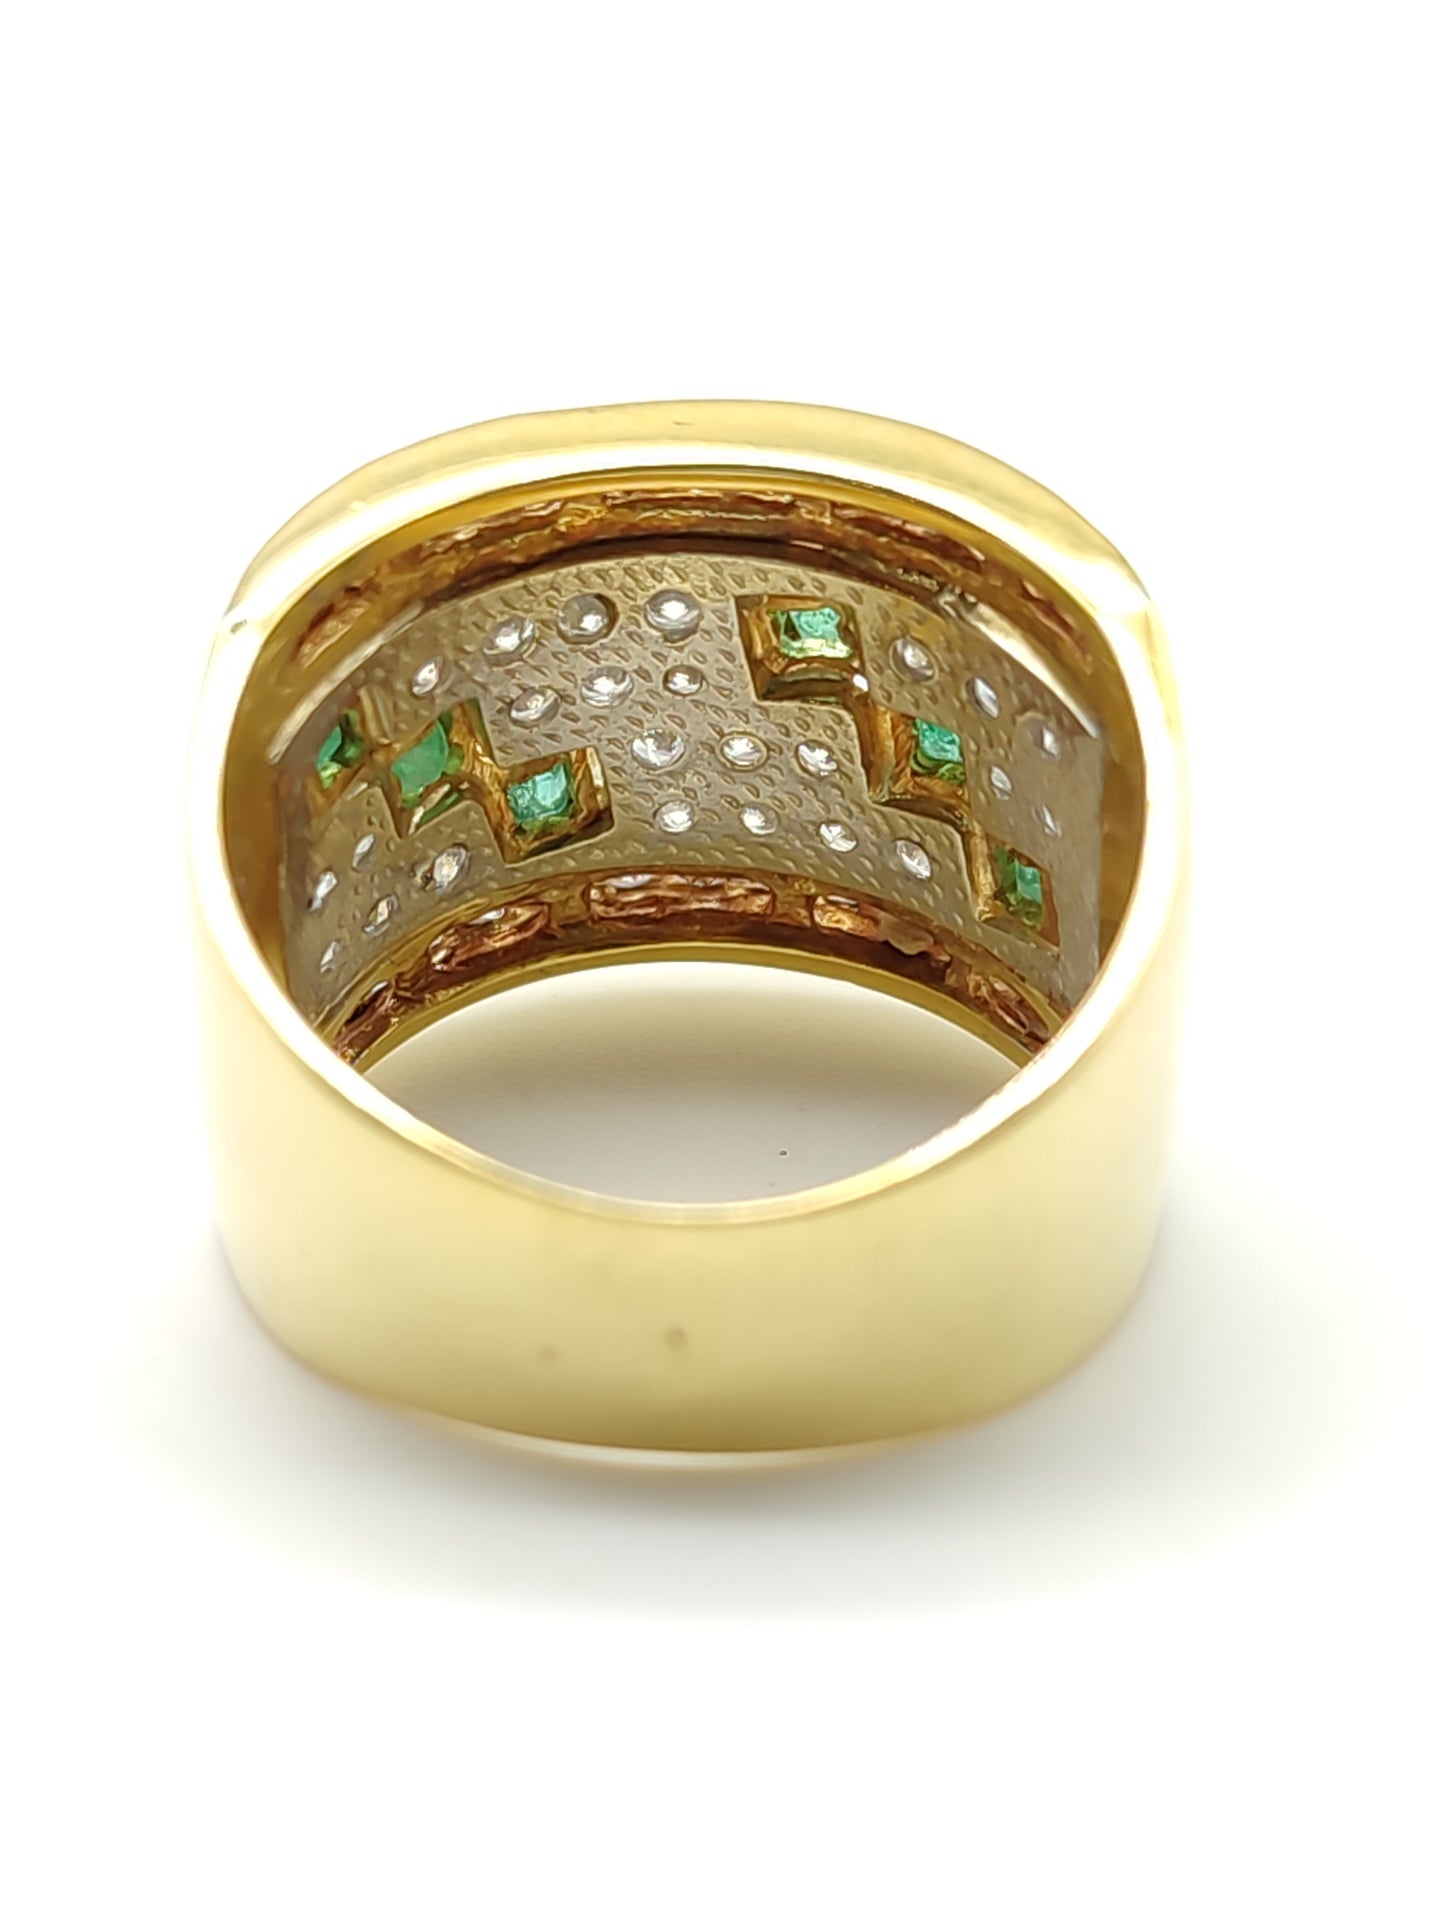 Pavan - Gold band ring with zircons and emeralds